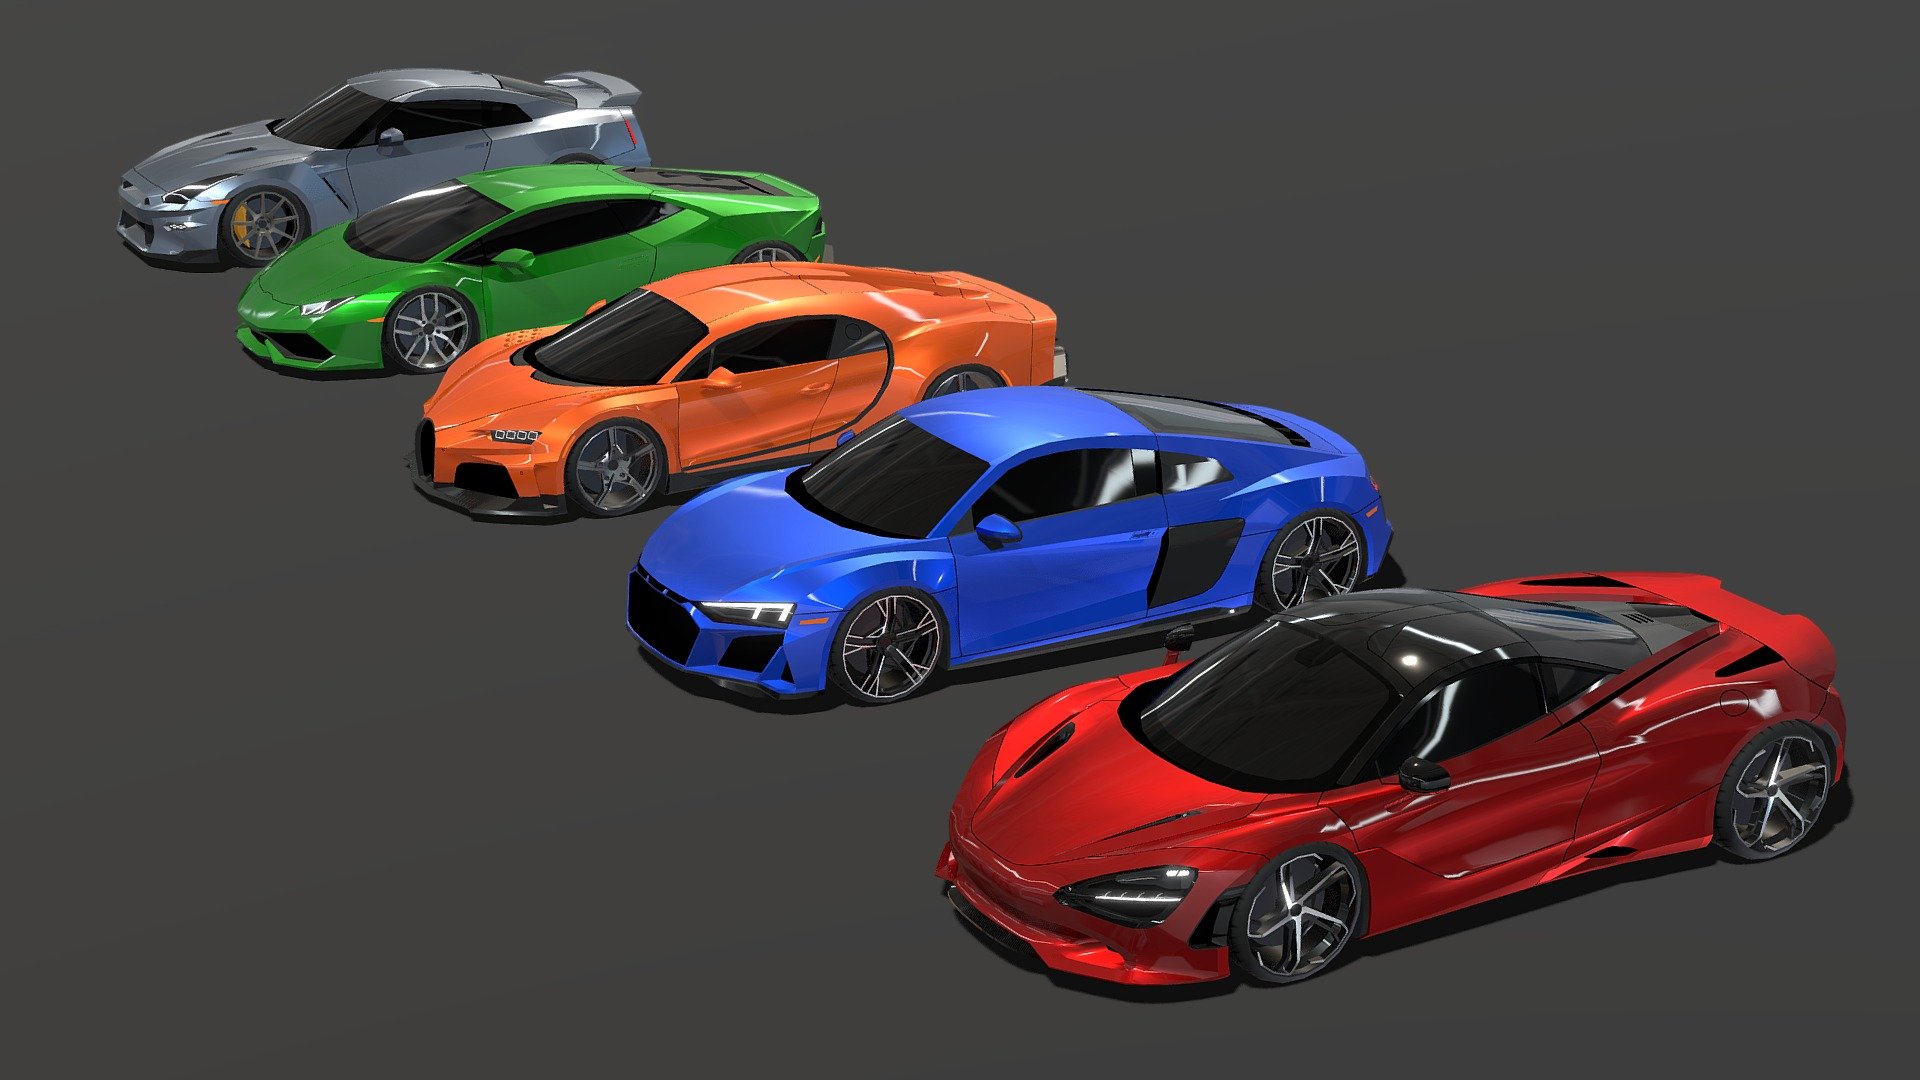 This pack contains 5 low-poly supercars created originally in Blender 3.6

The models have clean and optimized polygonal geometry. 7-8,000 faces per each car.

Full pack specs: Polygons: 33,324  /  Vertices: 37,626  /  Triangles: 70,595  /  Objects: 5 

Easily adjustable car paint. Every material is named individually.

Included 3D formats: FBX / OBJ / GLB / GLTF / BLEND - Supercars Lowpoly Pack - Buy Royalty Free 3D model by Rossty (@rossty3d) 3d model